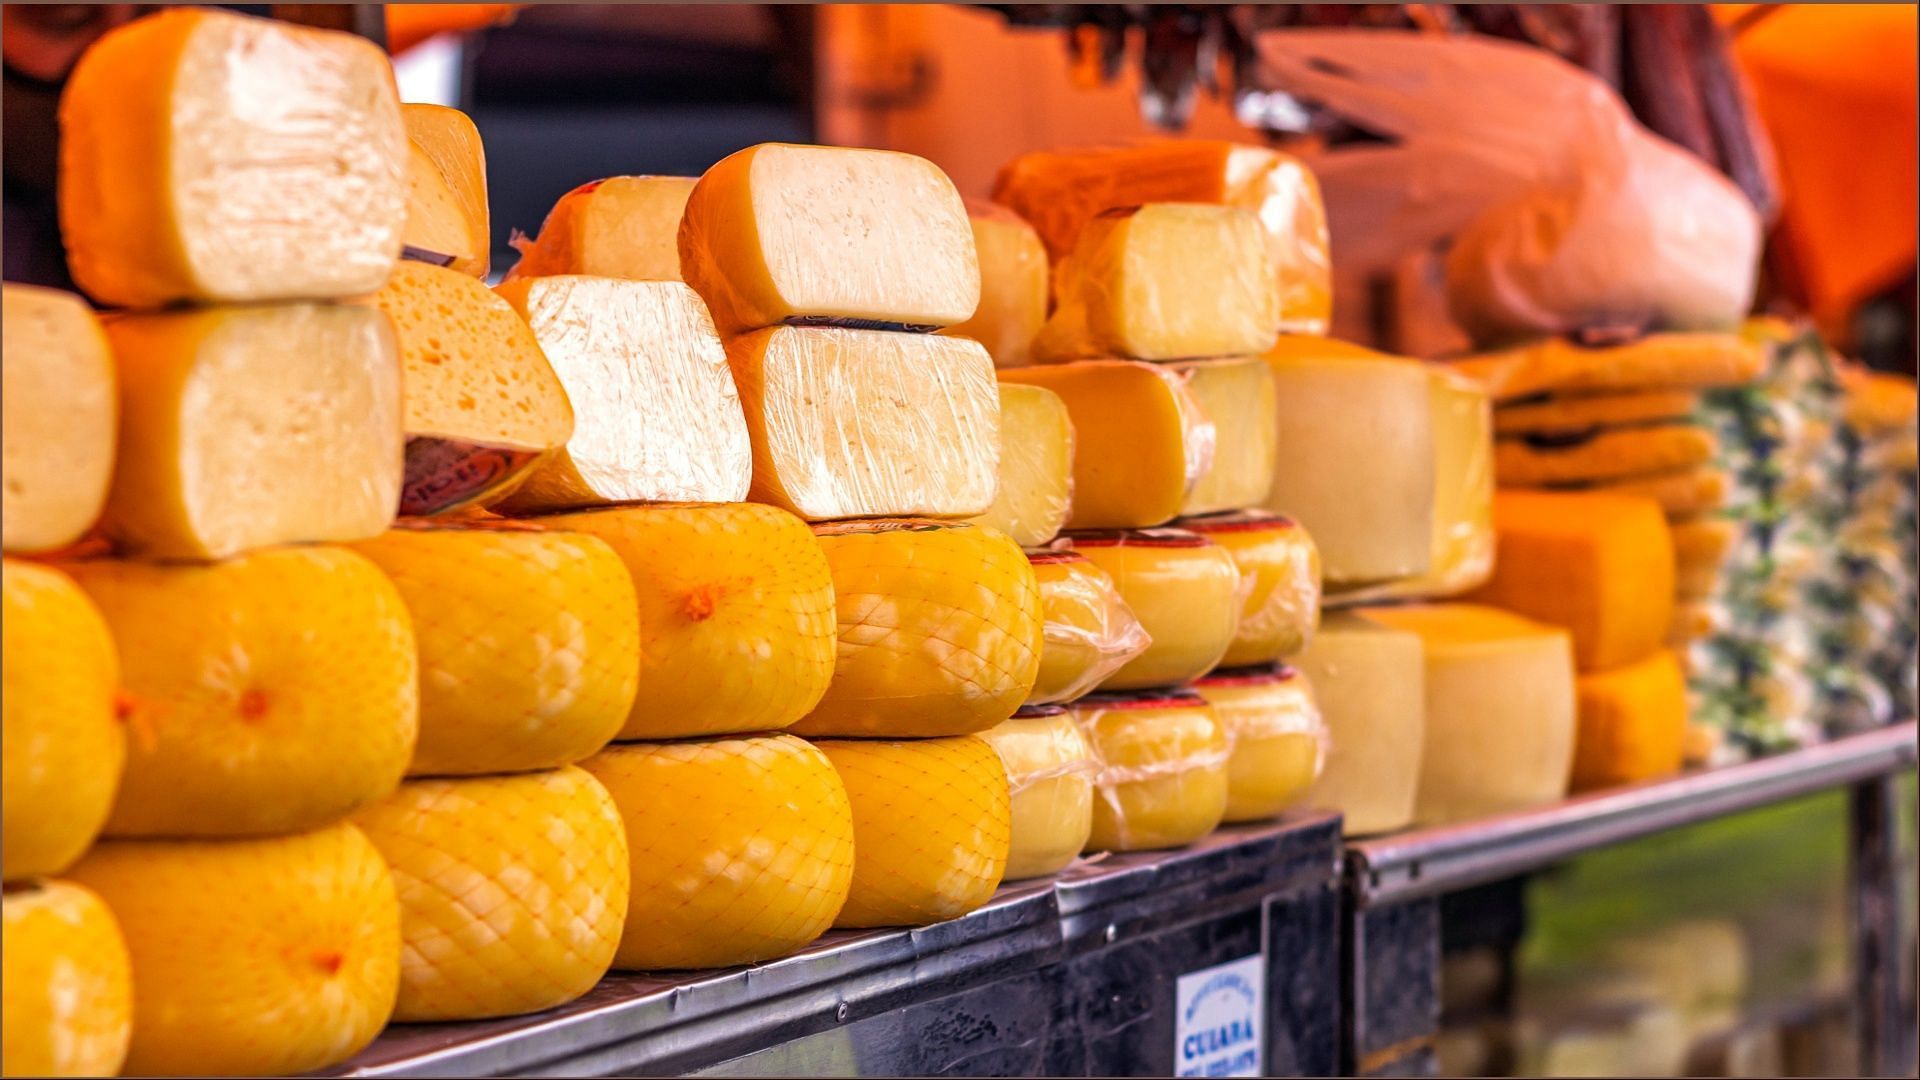 Rizo-L&oacute;pez Foods, Inc. recalls select dairy and cheese products over Listeria monoctyogenes concerns (Image via Leandro Bezerra / Pexels)